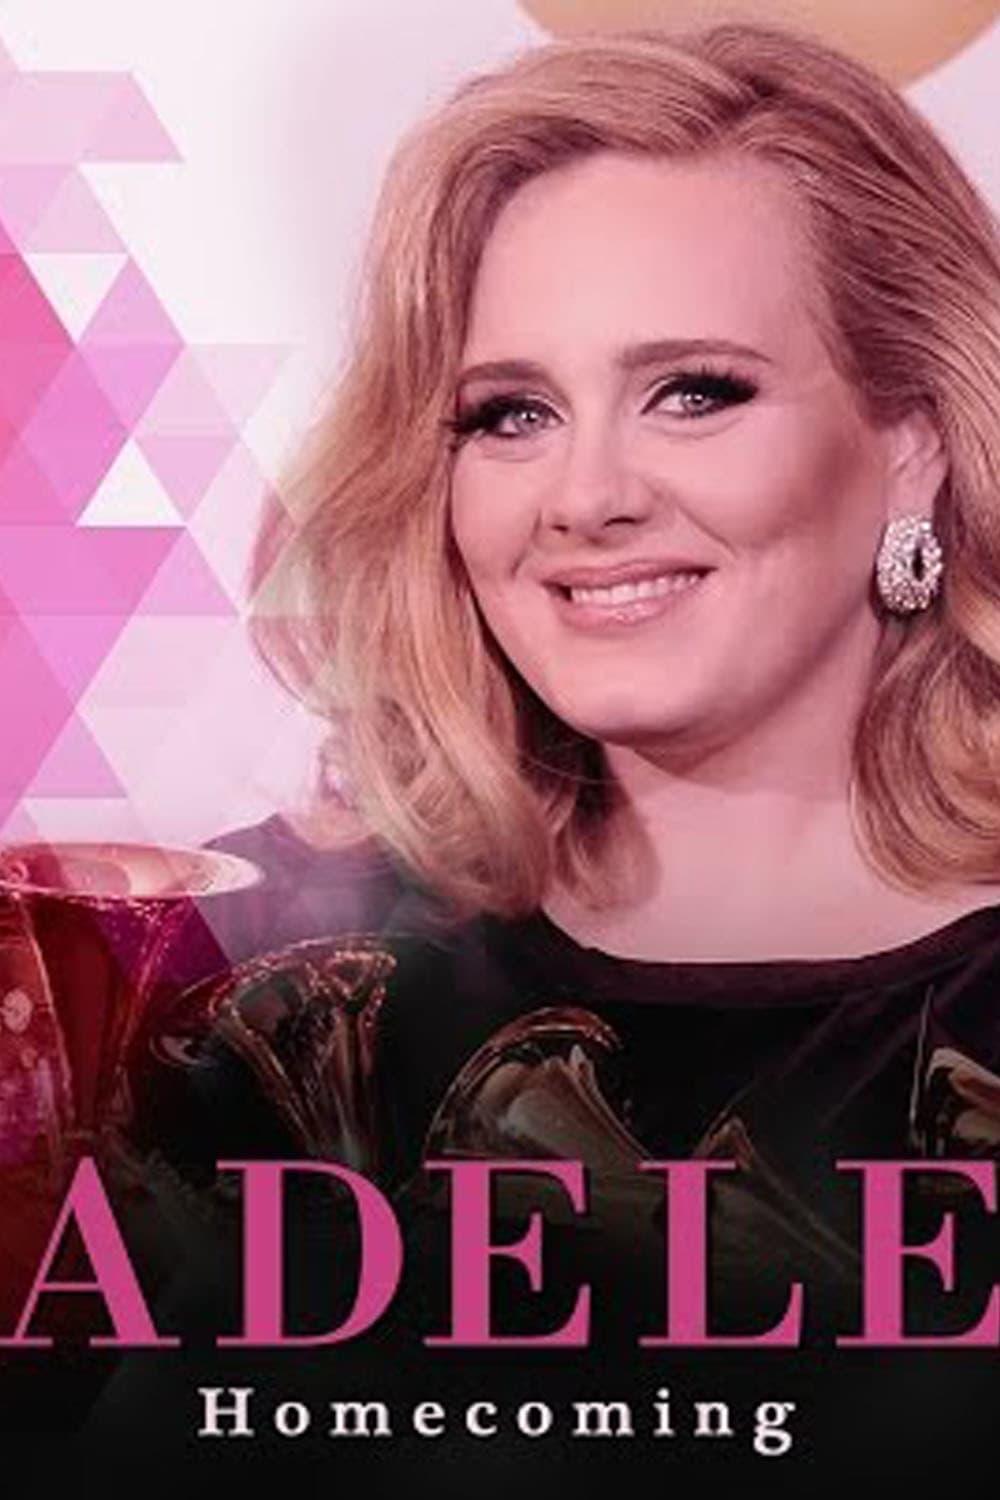 Adele: Homecoming poster